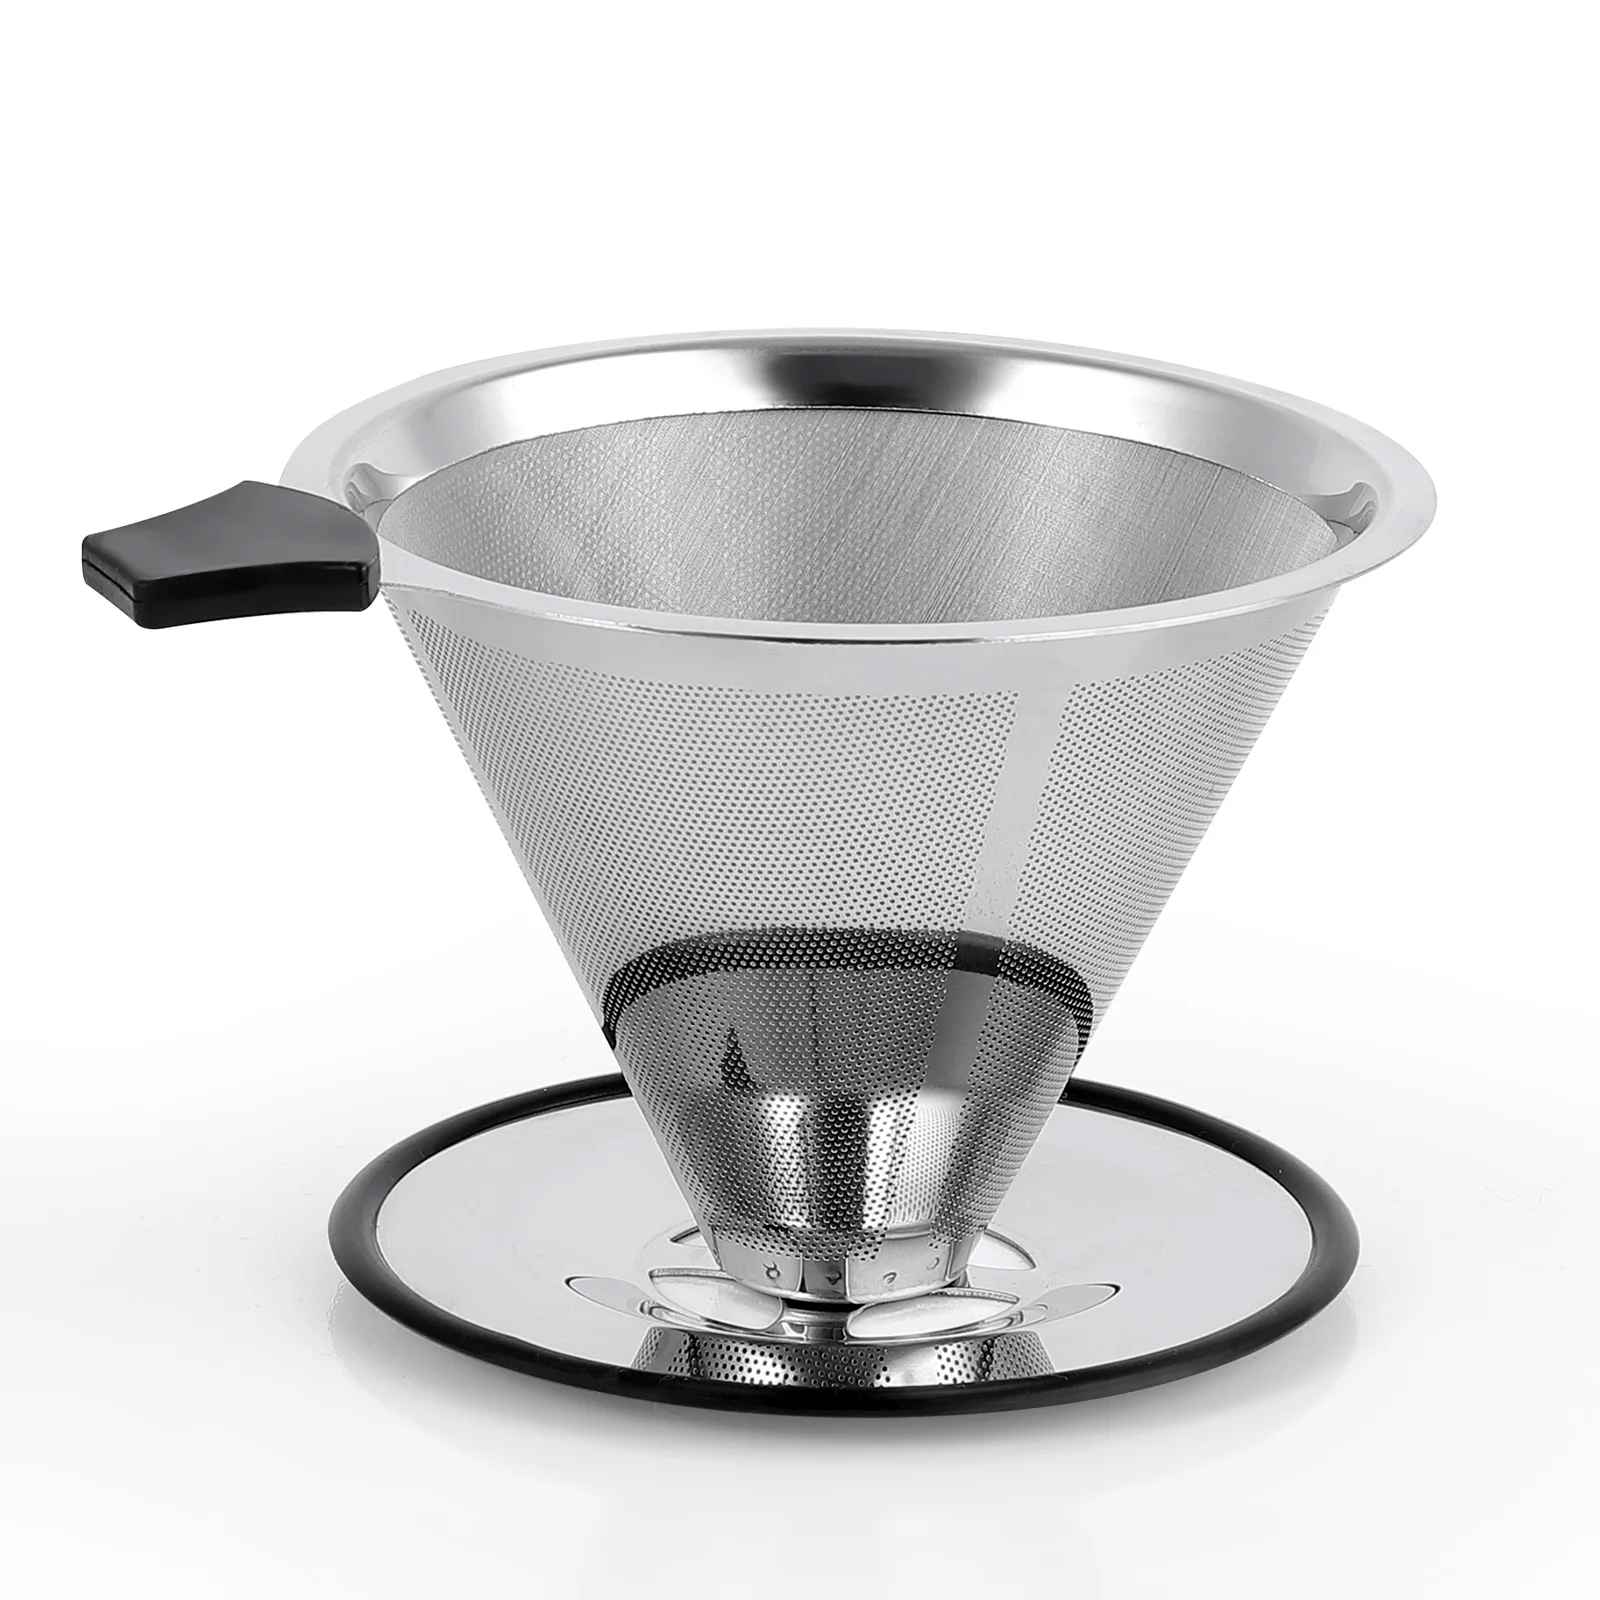 

Micromesh Drip Coffee Stainless And Dripper, Coffee Filter Steel Ultra Slow Cone Fine Filter, Paperless Reusable,